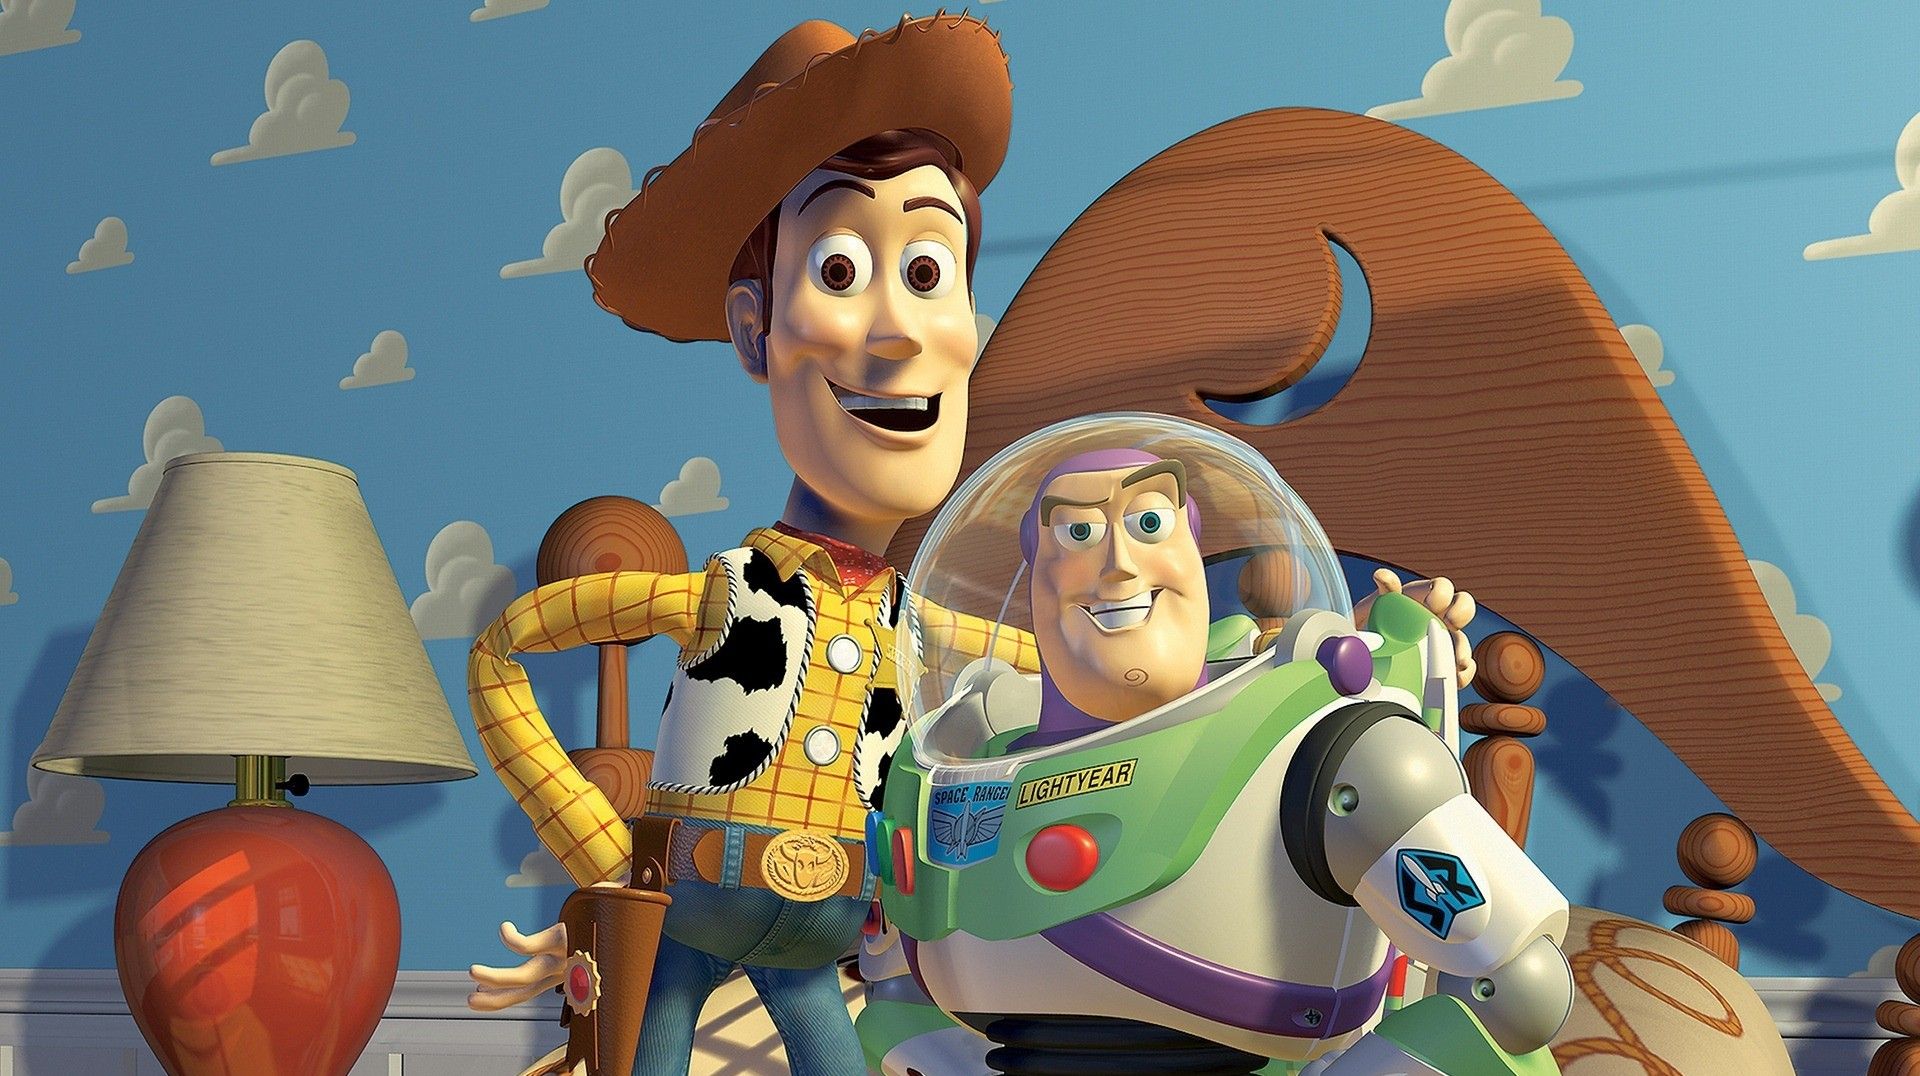 Toy Story 4 will hit theatres in June 2017